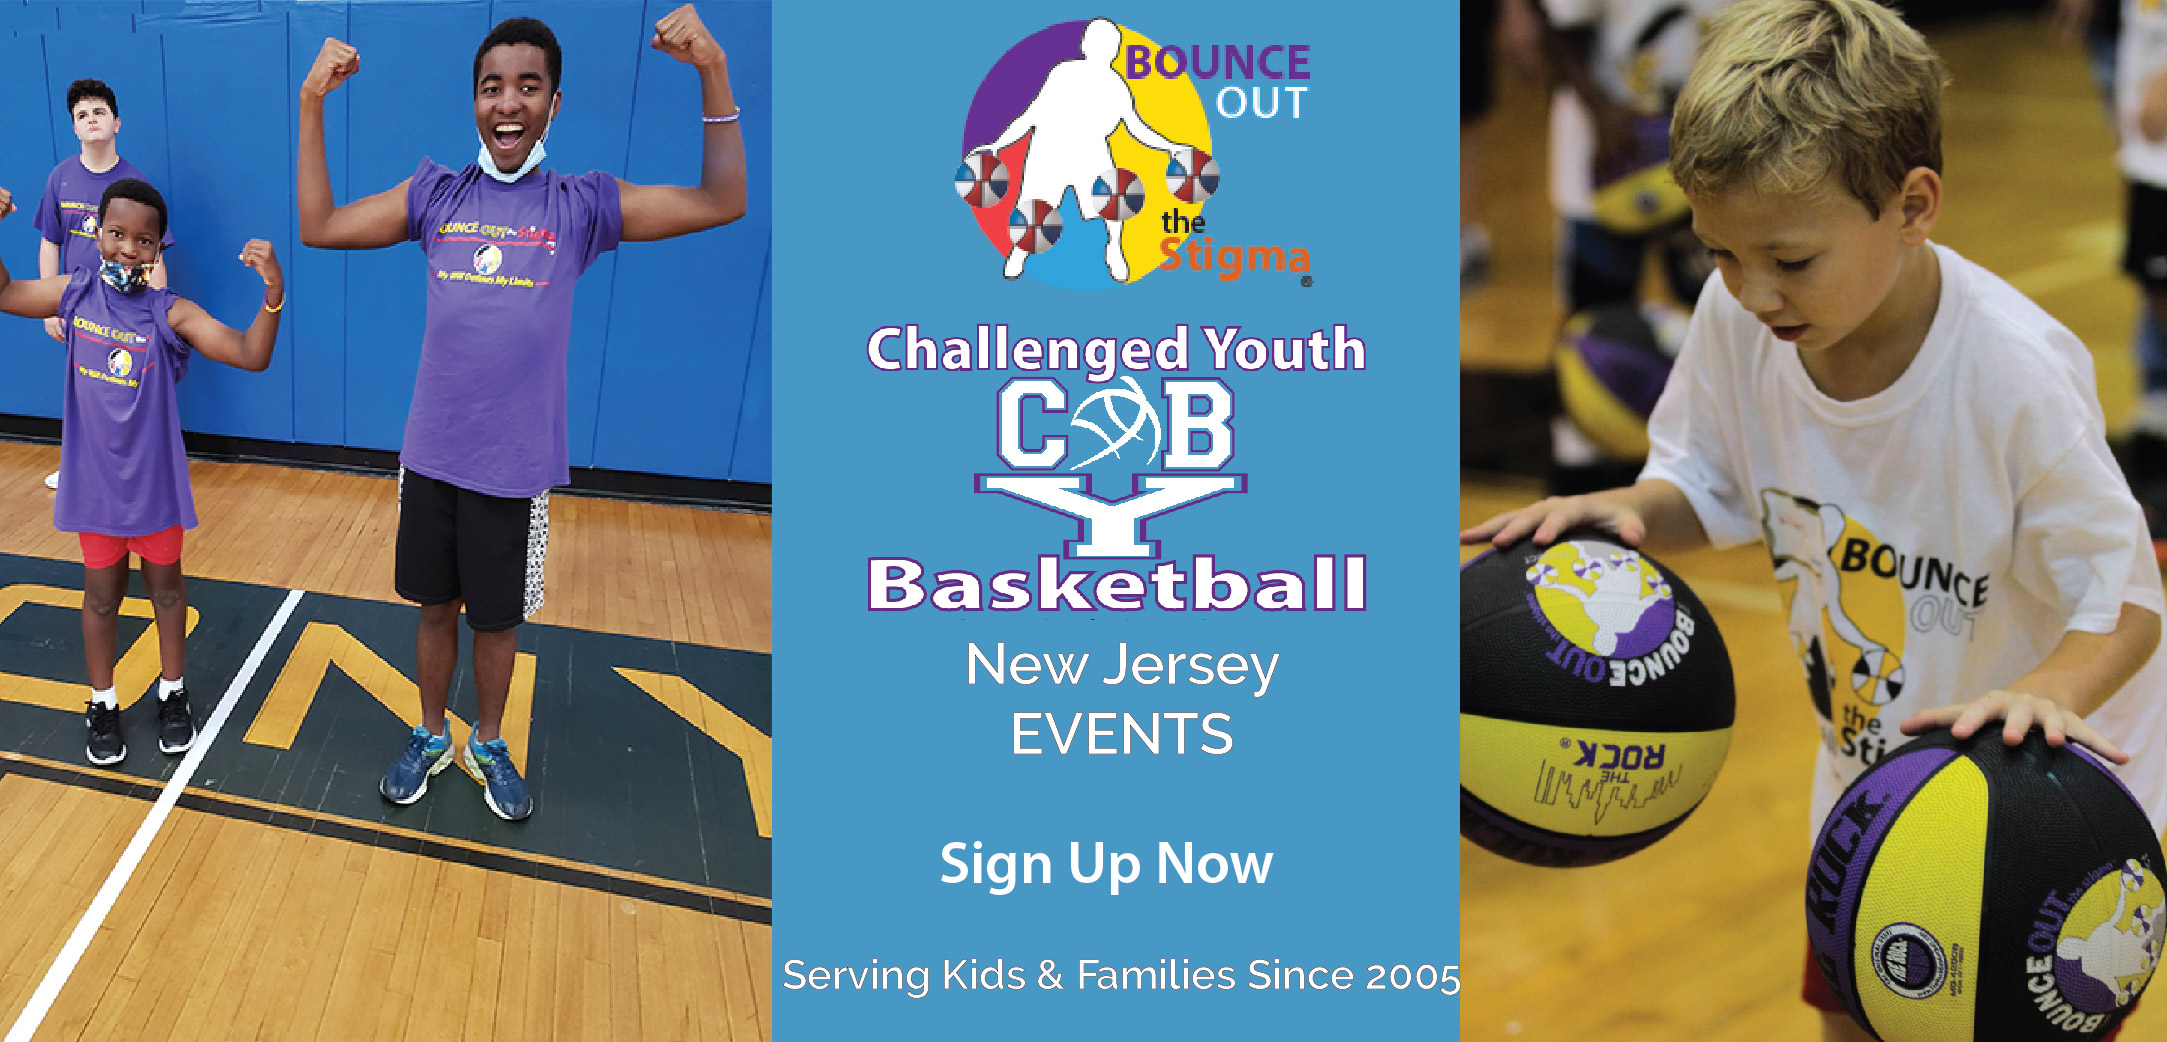 Bounce Out the Stigam Special Needs Basketball Programs All Inclusive Basketball Camps and Clinics